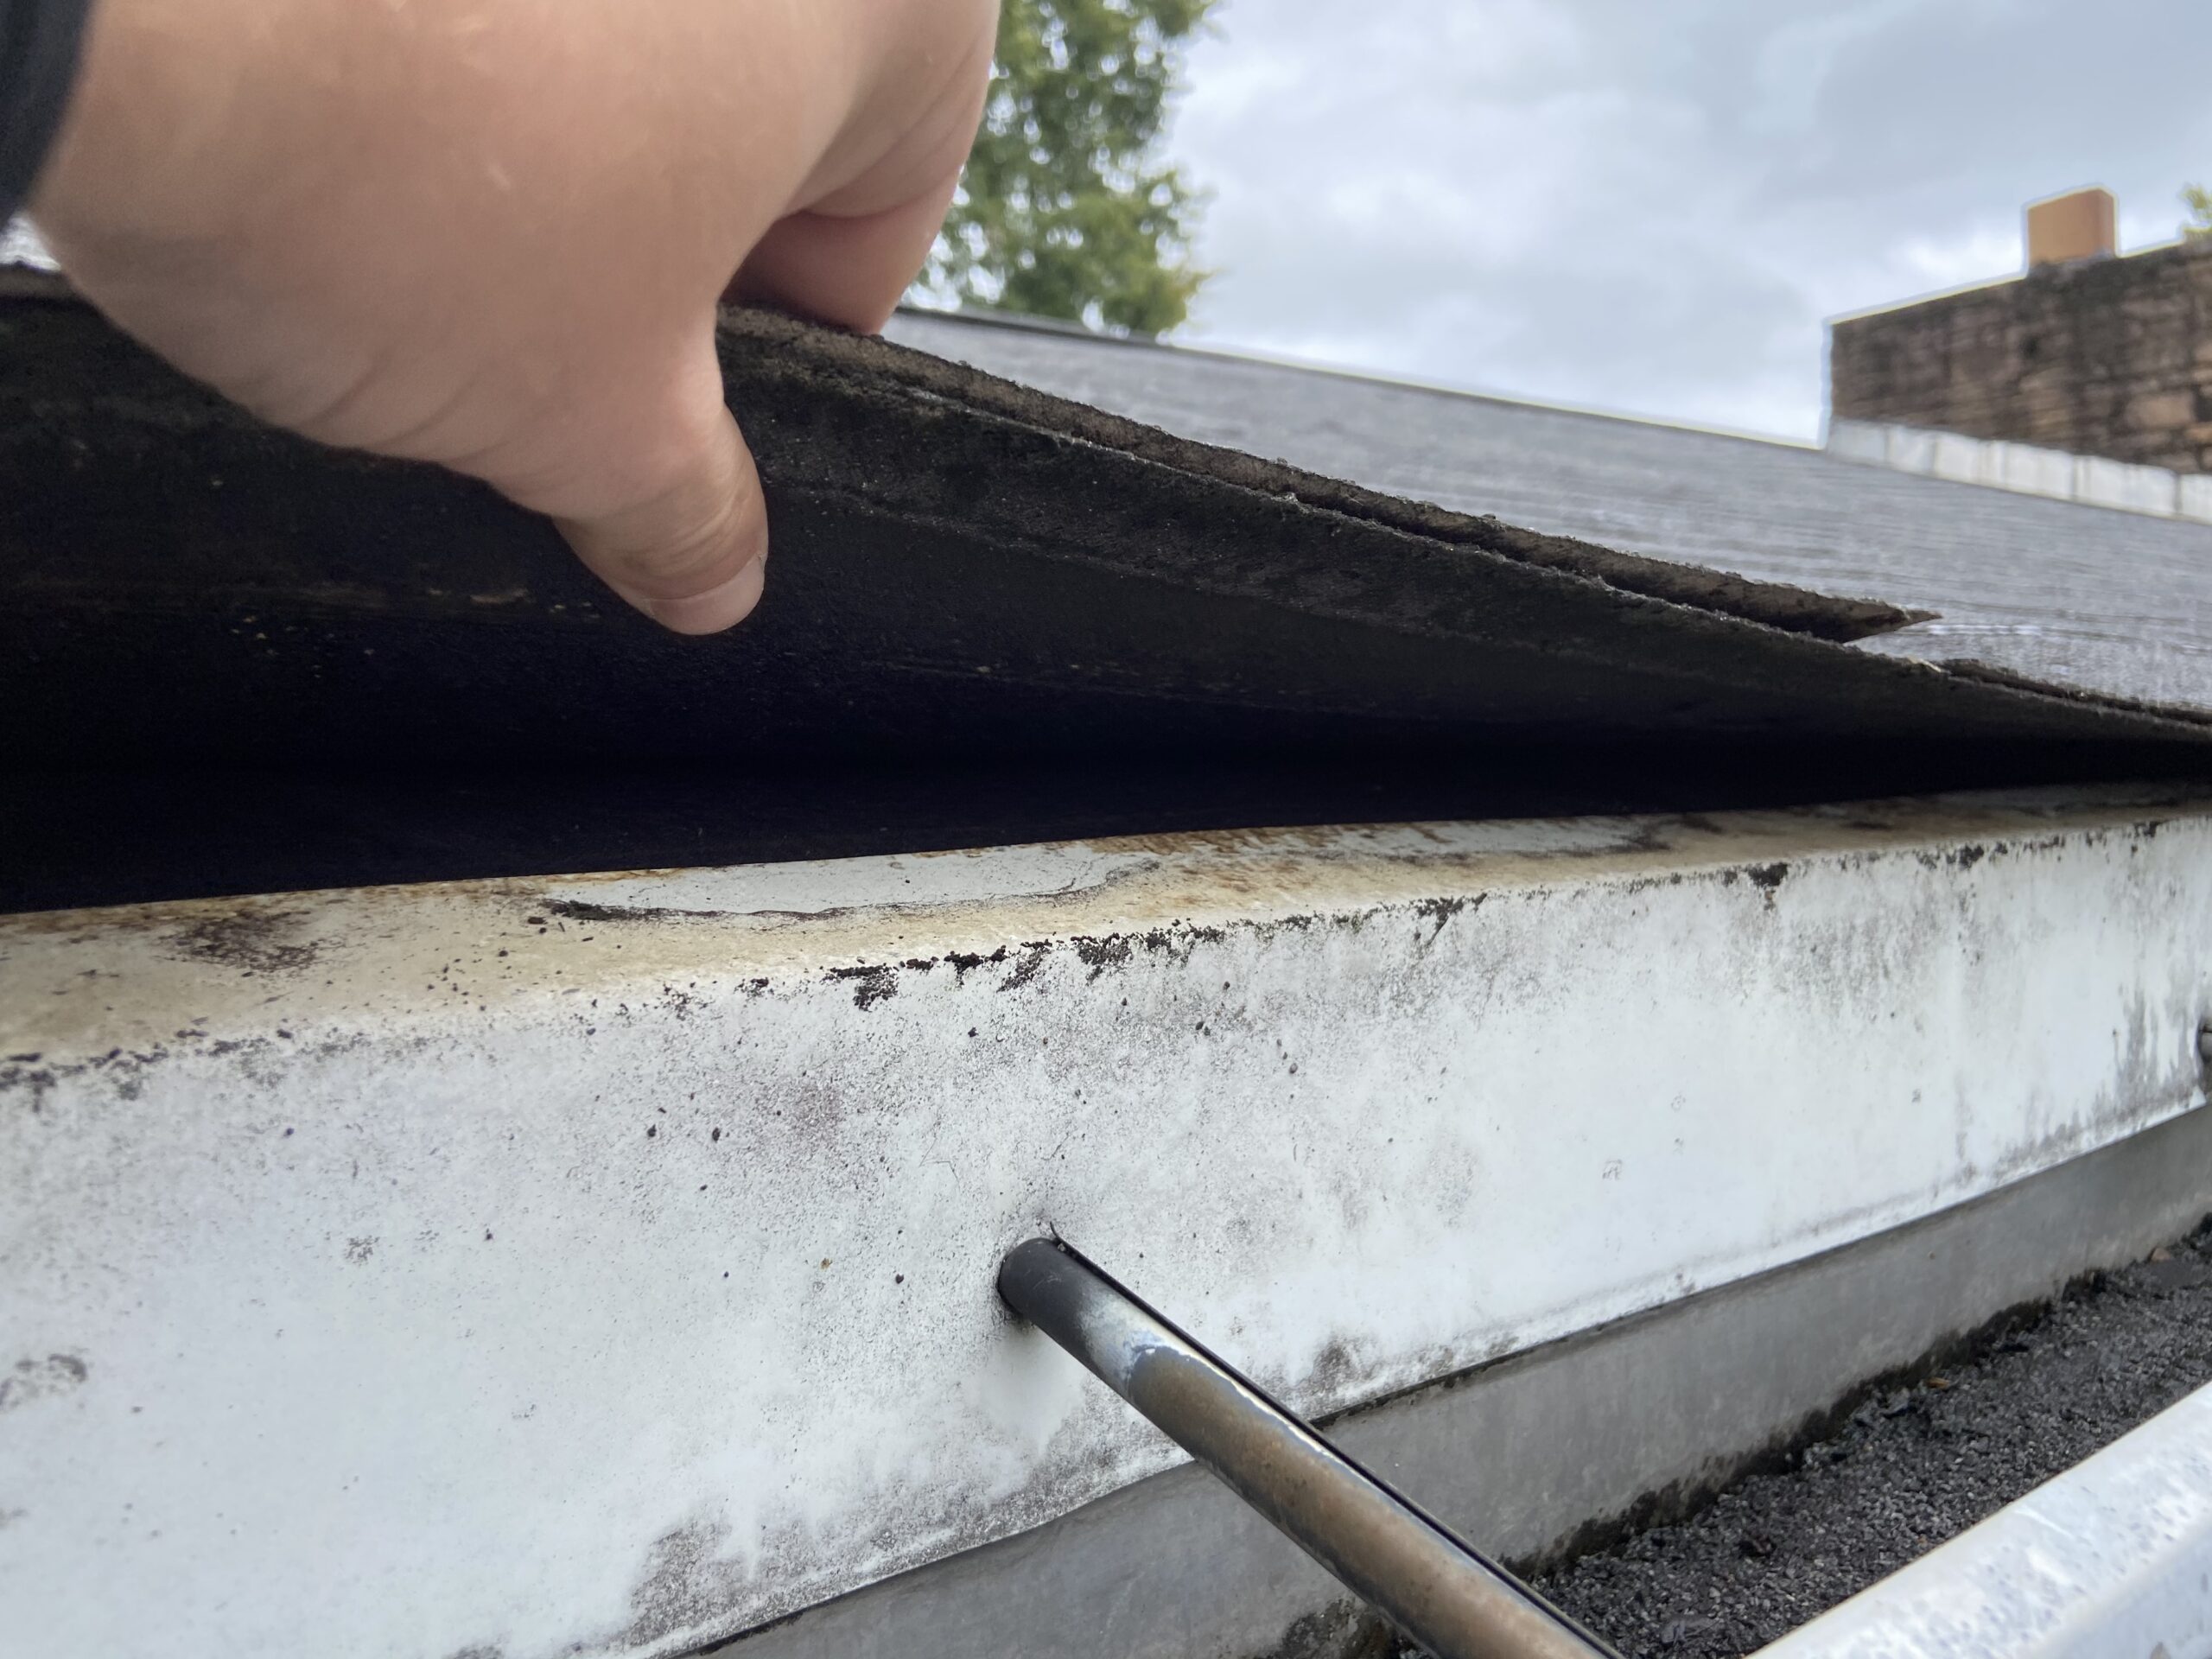 These gutters are in very bad shape you can see this is a picture of gutter hangers that are pulling out from the facia